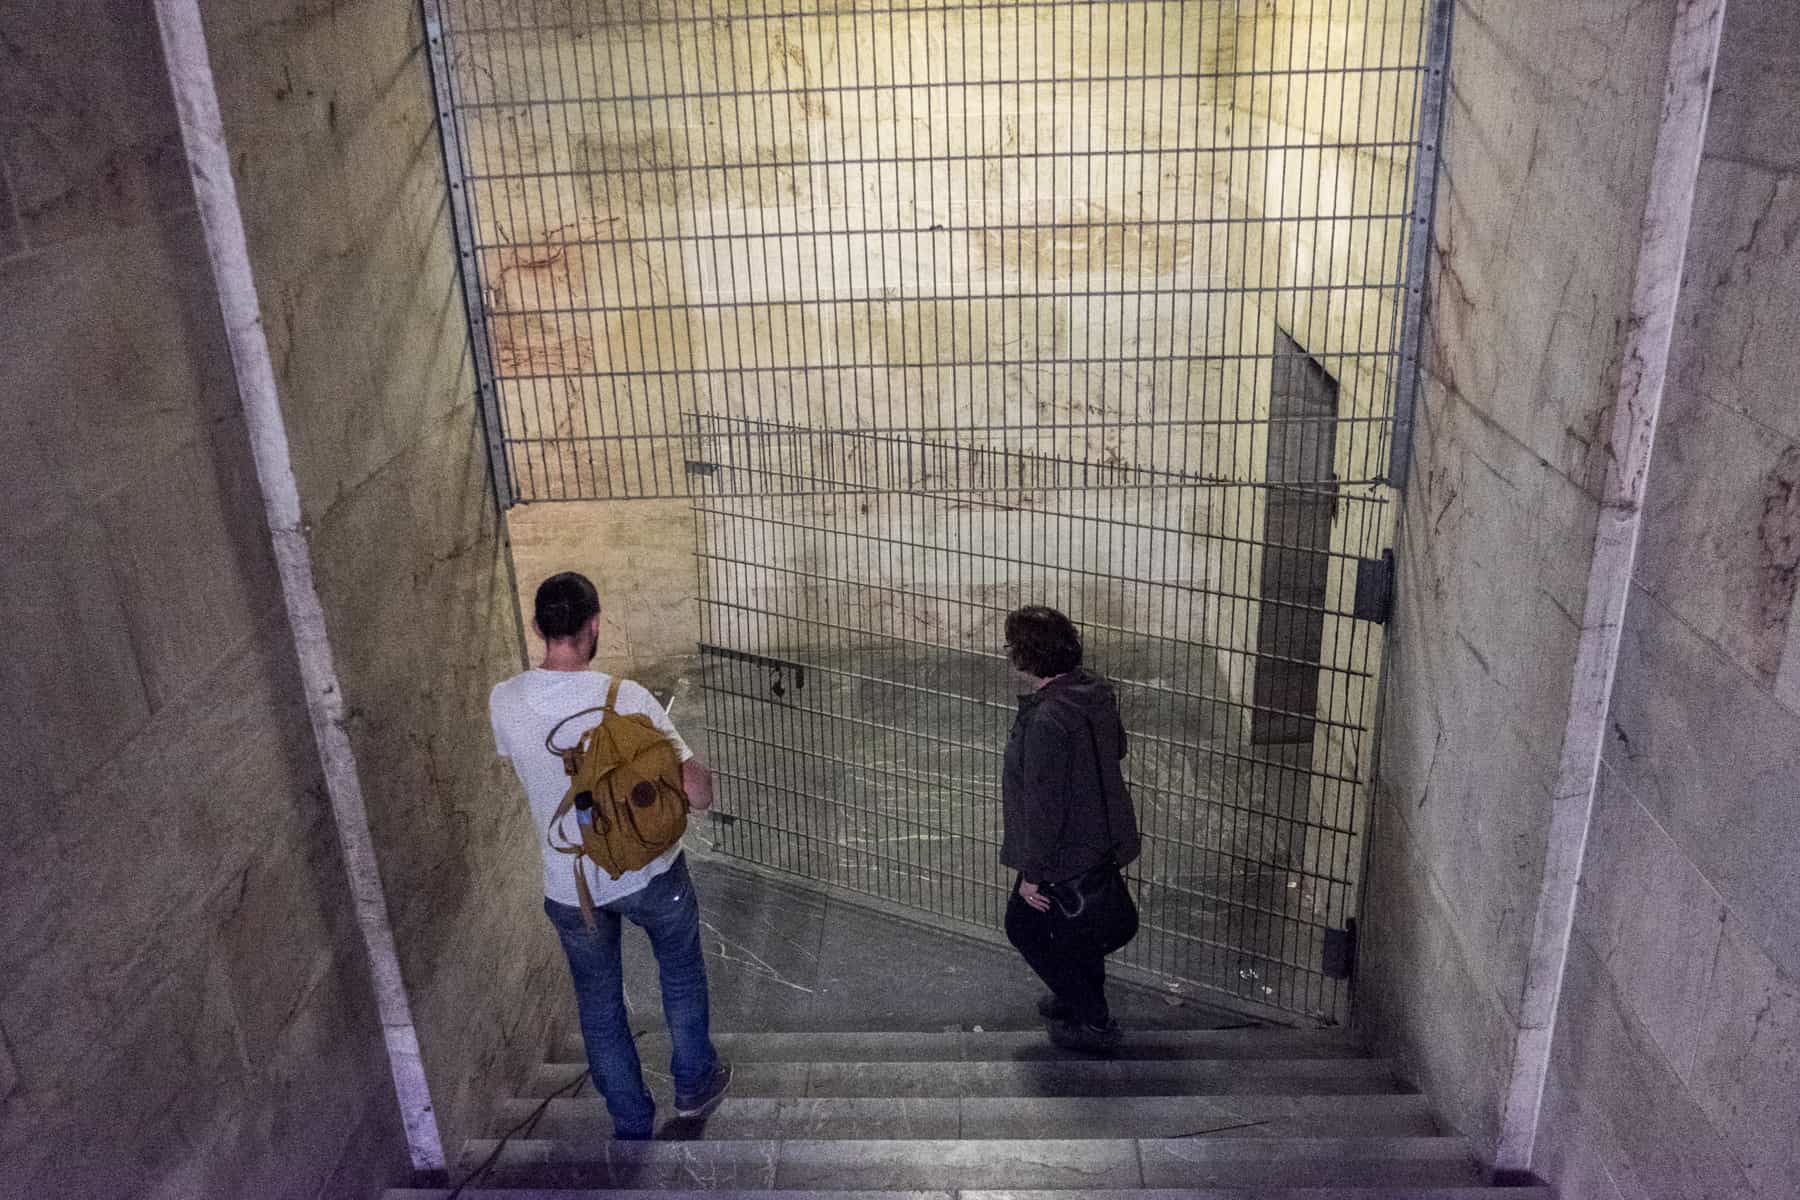 A man and a female tour guide walk through the looming marble interior of the Zeppelin Field Tribune building - one of the Nazi Party Rally Grounds sites